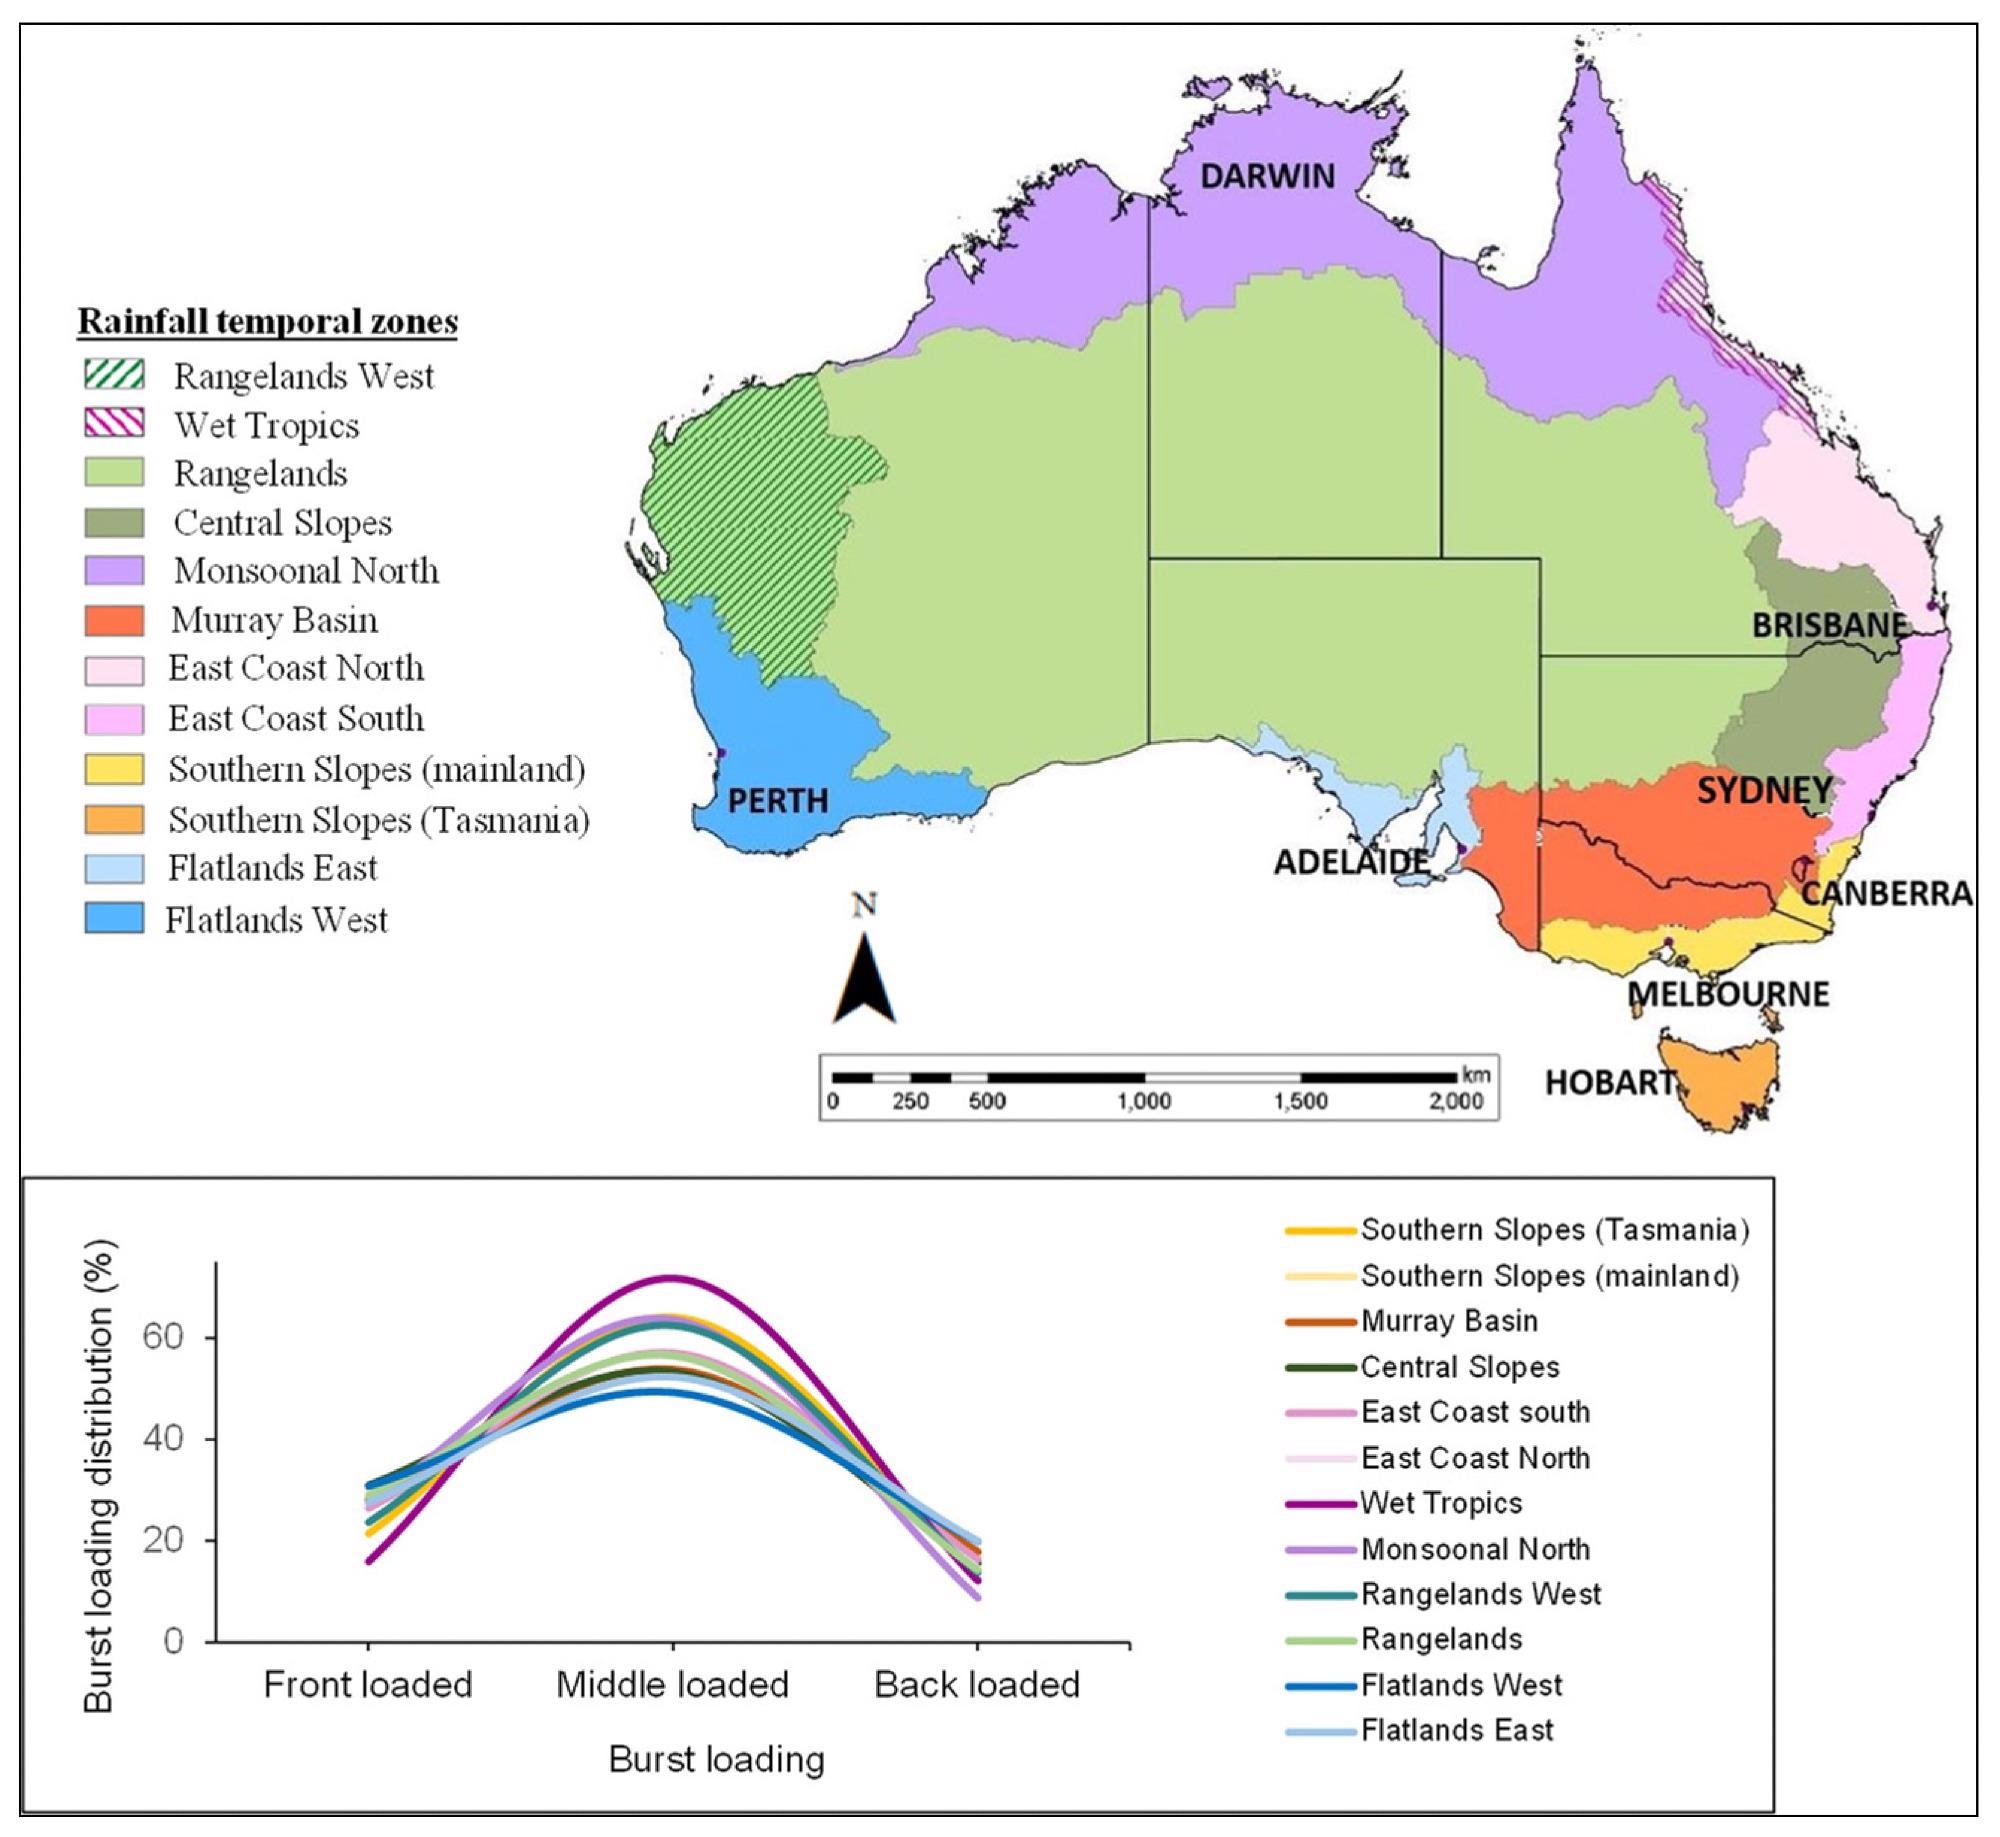 Rainfall temporal zone map of Australia indicating the front (FL), middle (ML) and back (BL) load distribution of rainfall bursts in the rainfall zones for <6 h of rainfall duration. Data adopted from Australian Rainfall and Runoff guideline [47].